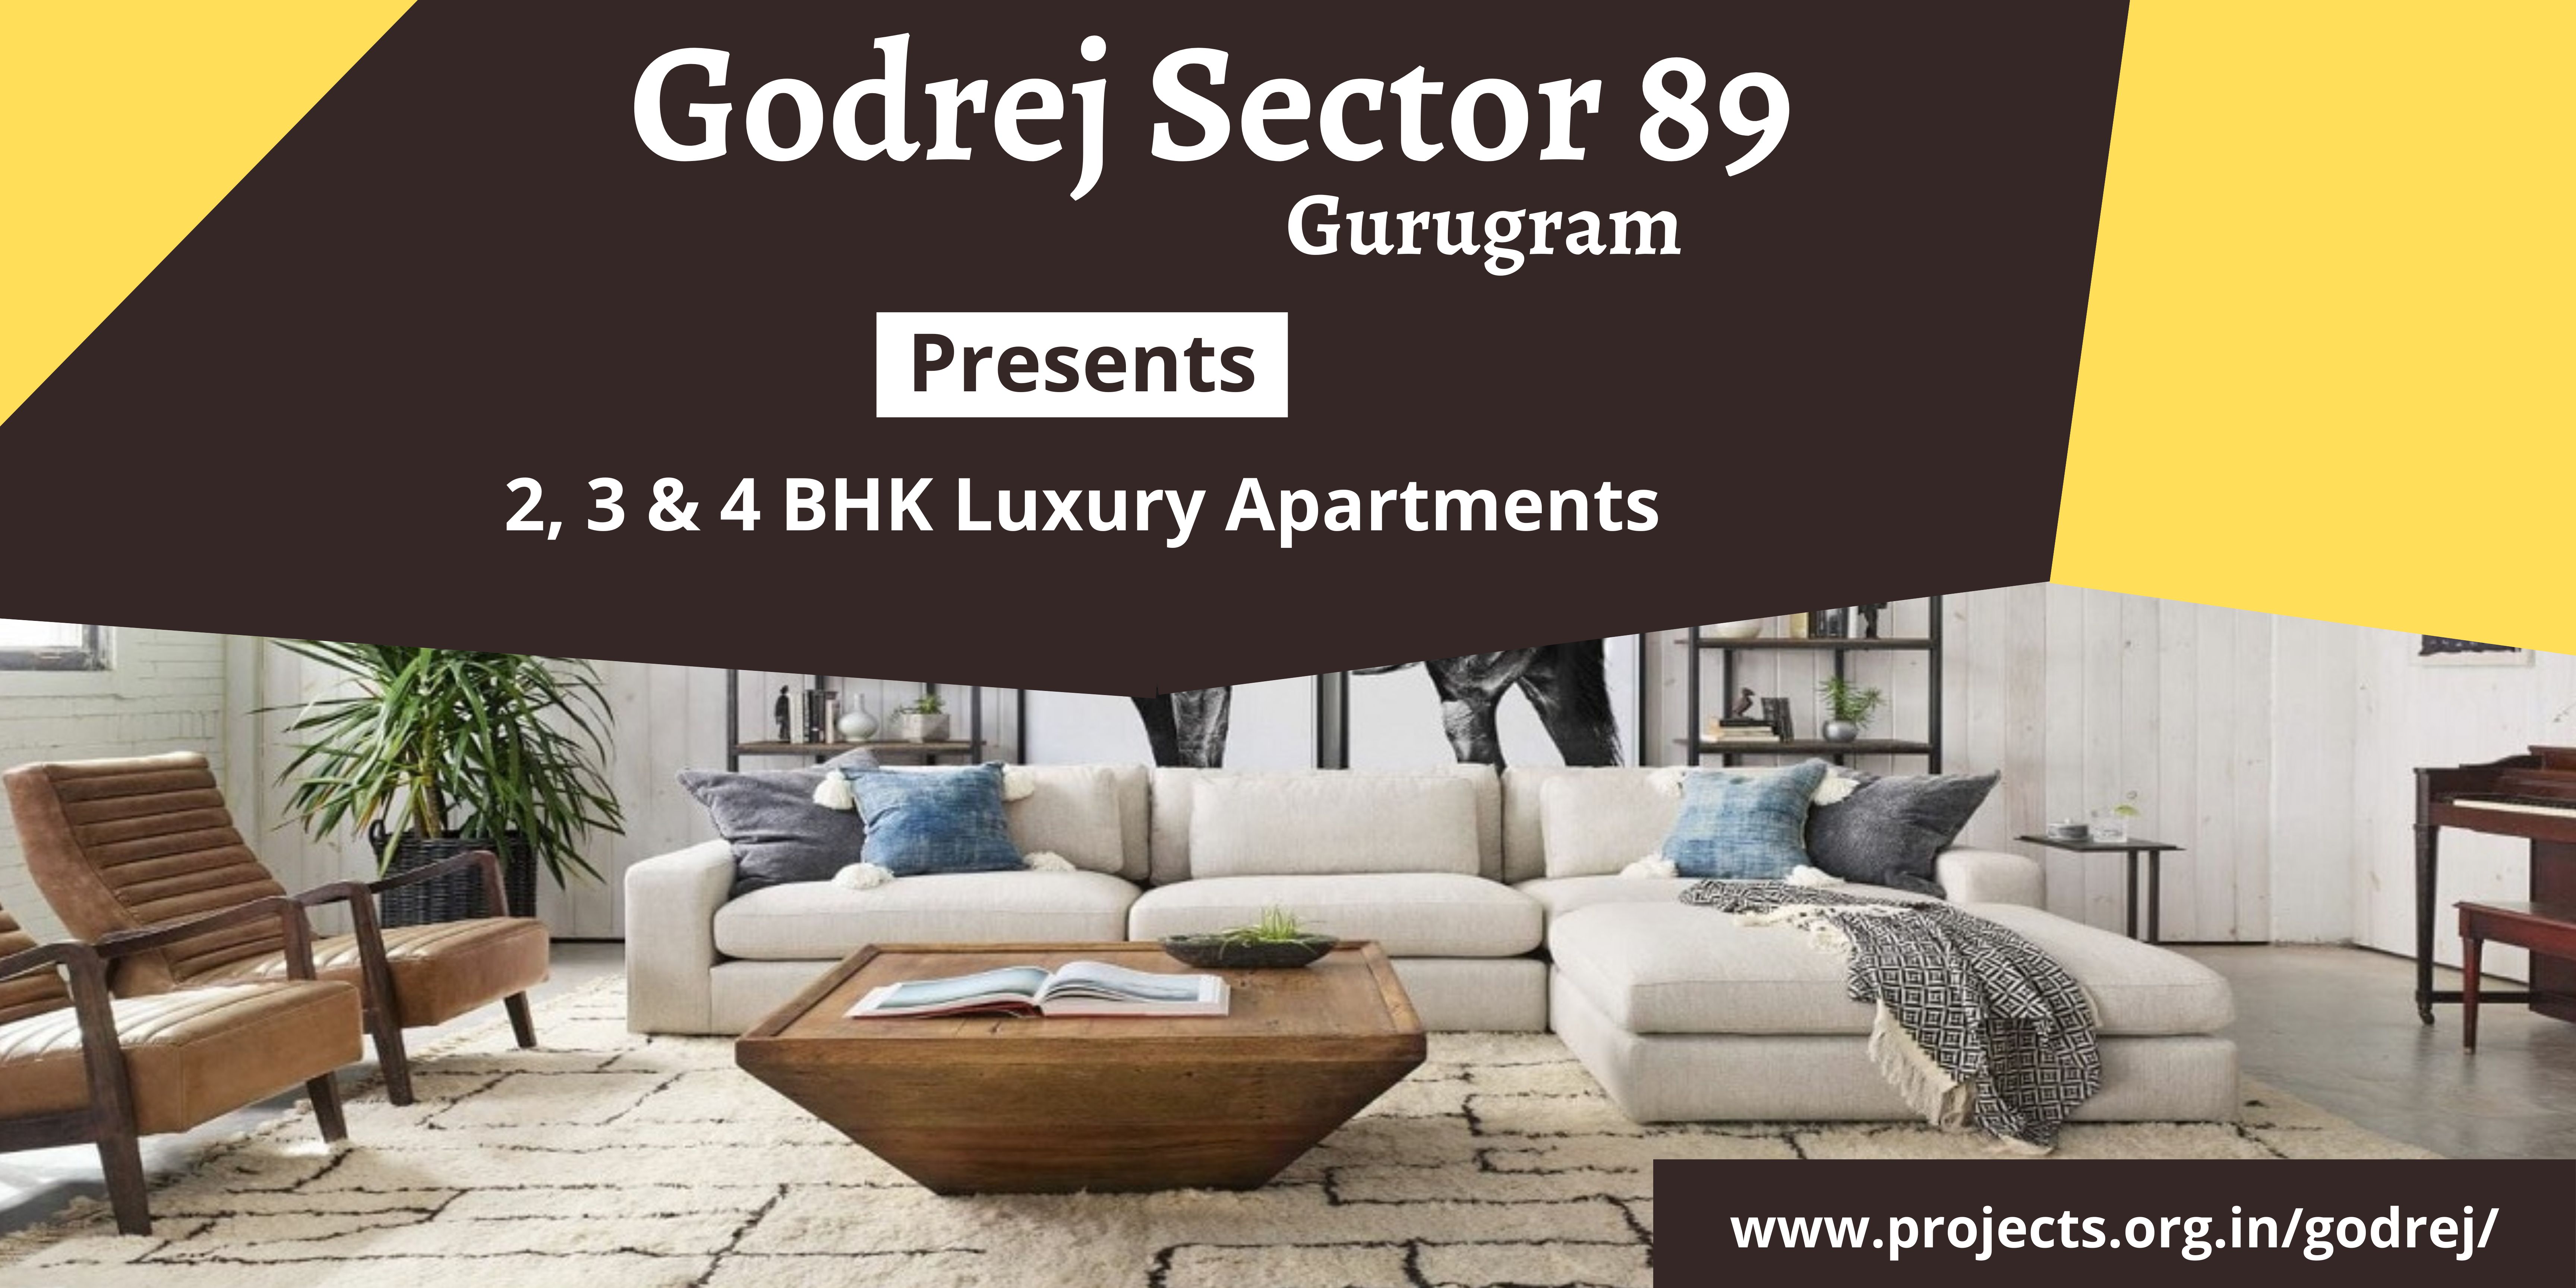 Godrej Sector 89 Gurgaon - Apartments That Redefine The Language Of Luxury